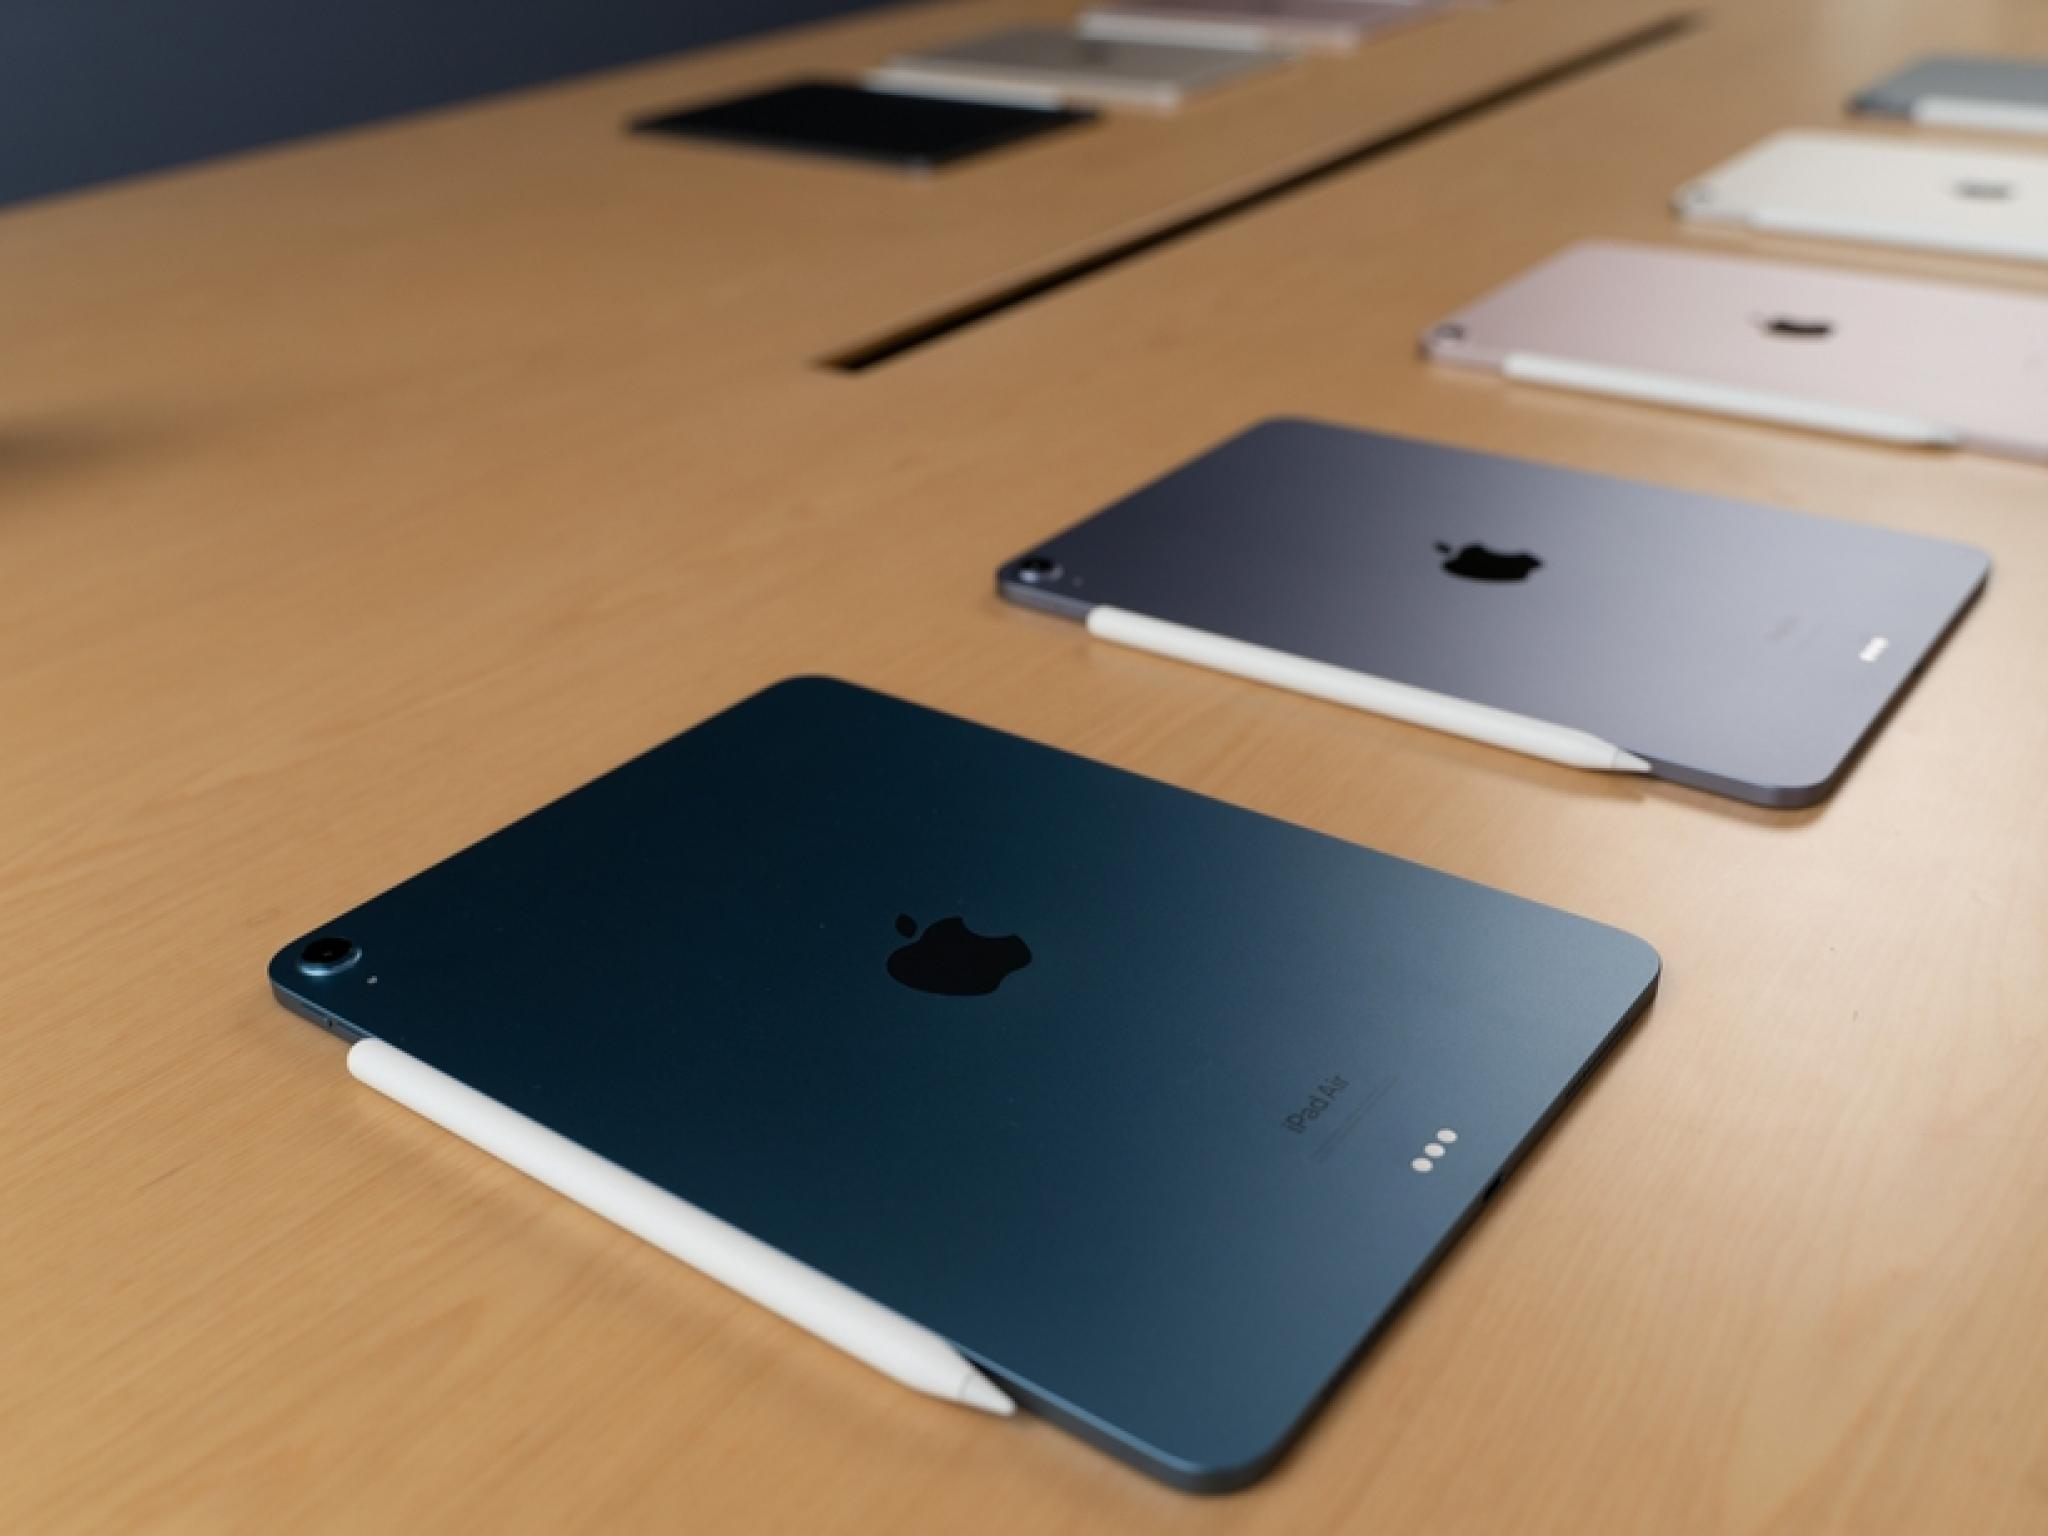  apples-2024-ipad-lineup-to-feature-larger-ipad-air-thinner-ipad-pro-report 